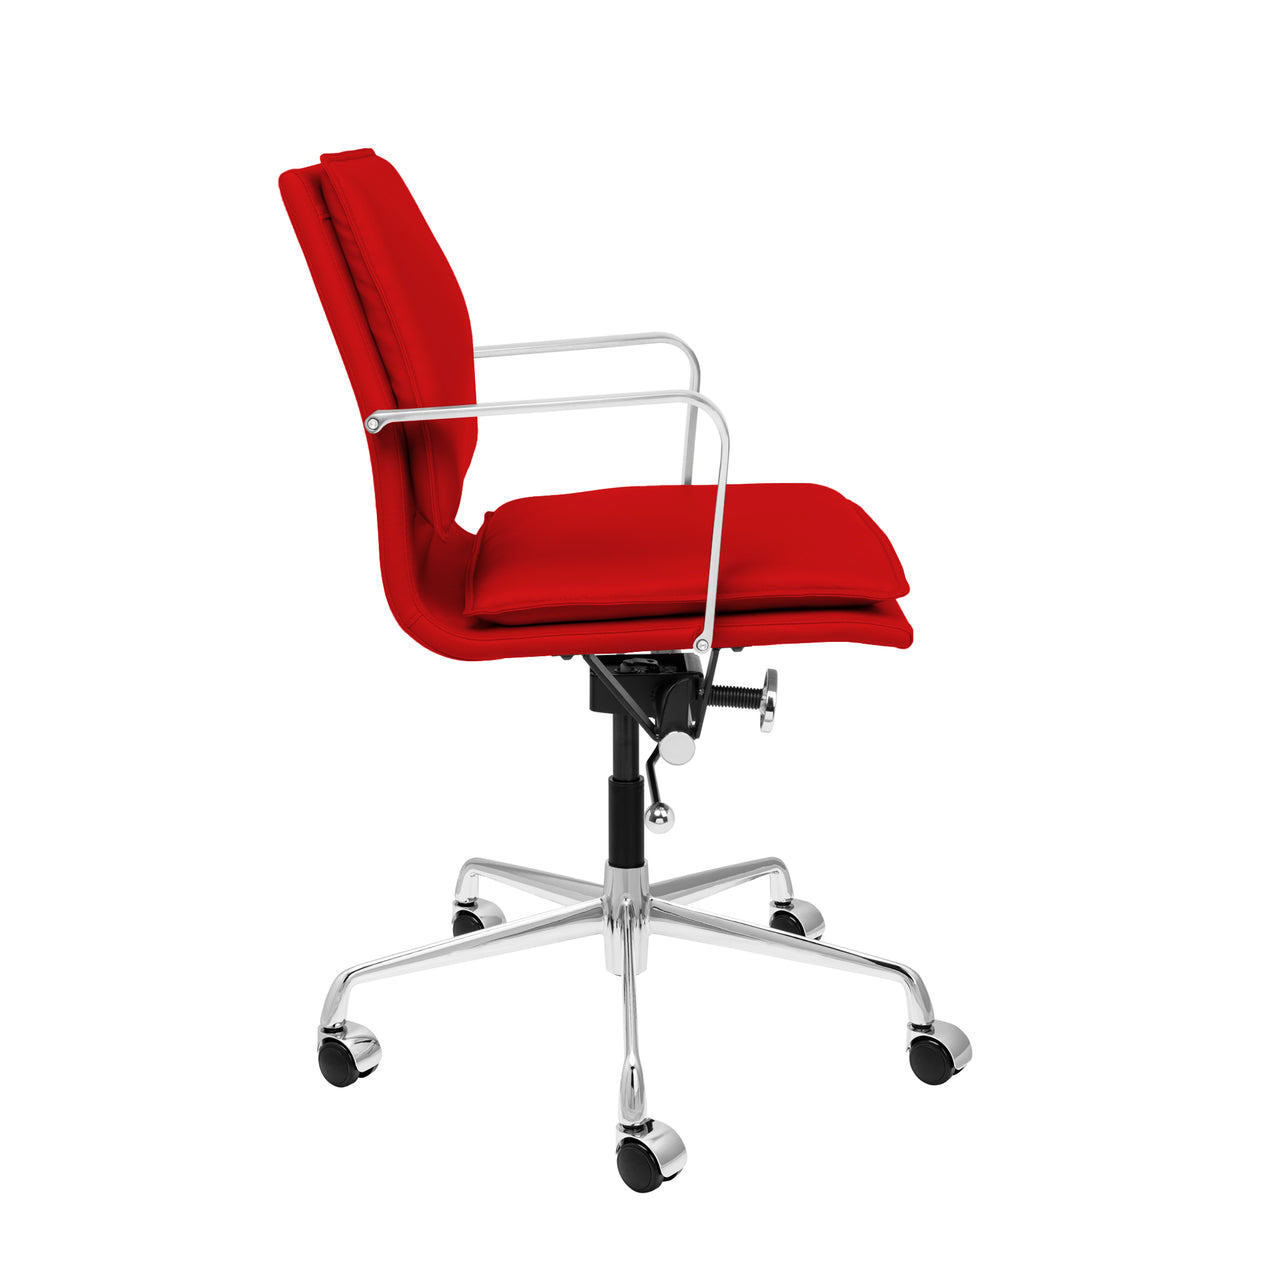 Lexi Soft Pad Office Chair (Red)